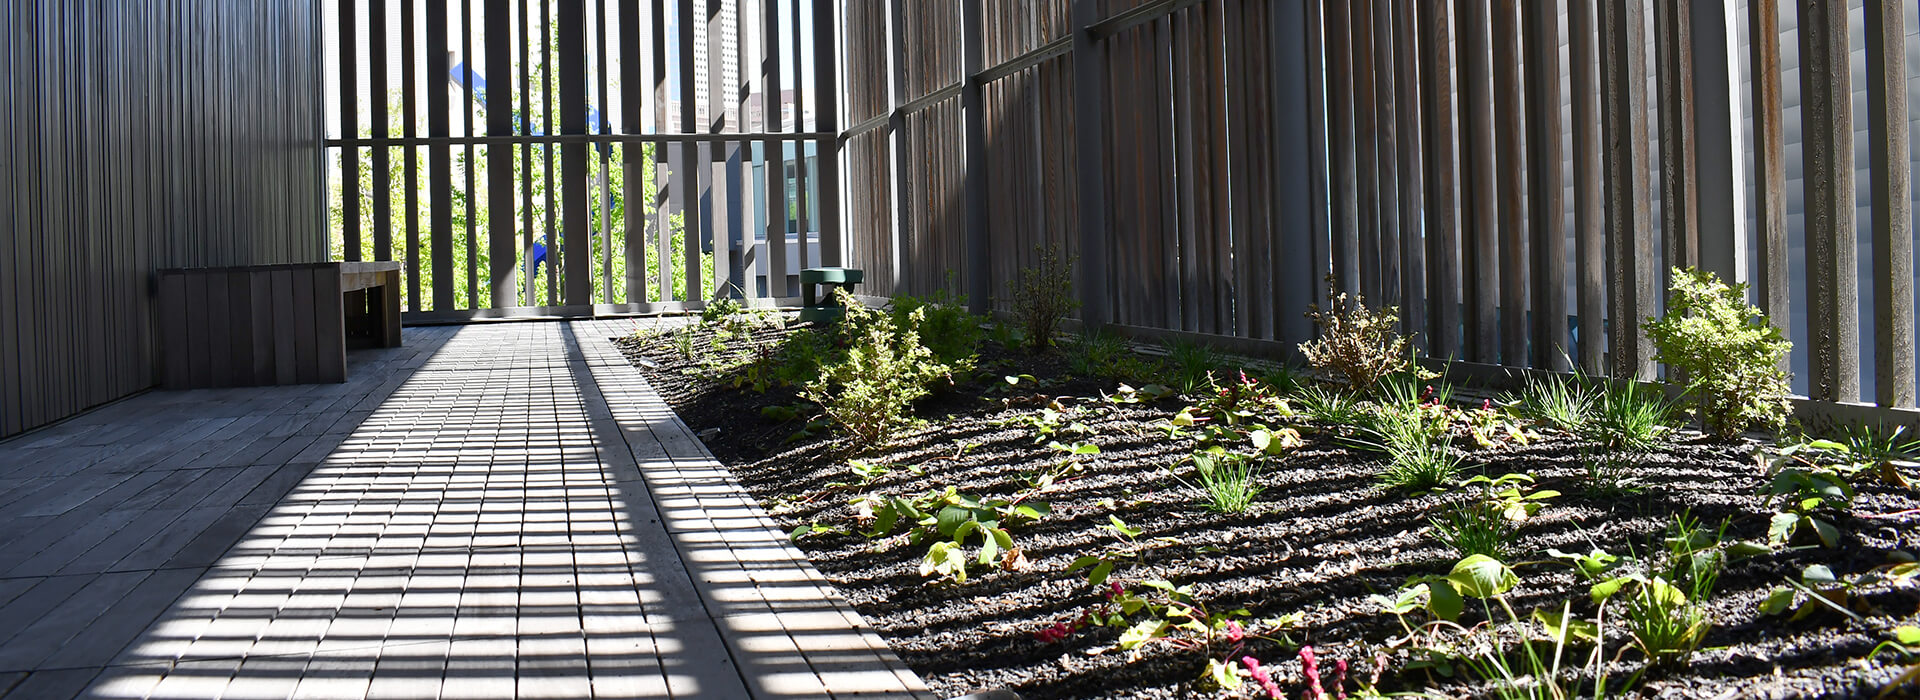 Installation image of a terrace at the Clyfford Still Museum with new plants